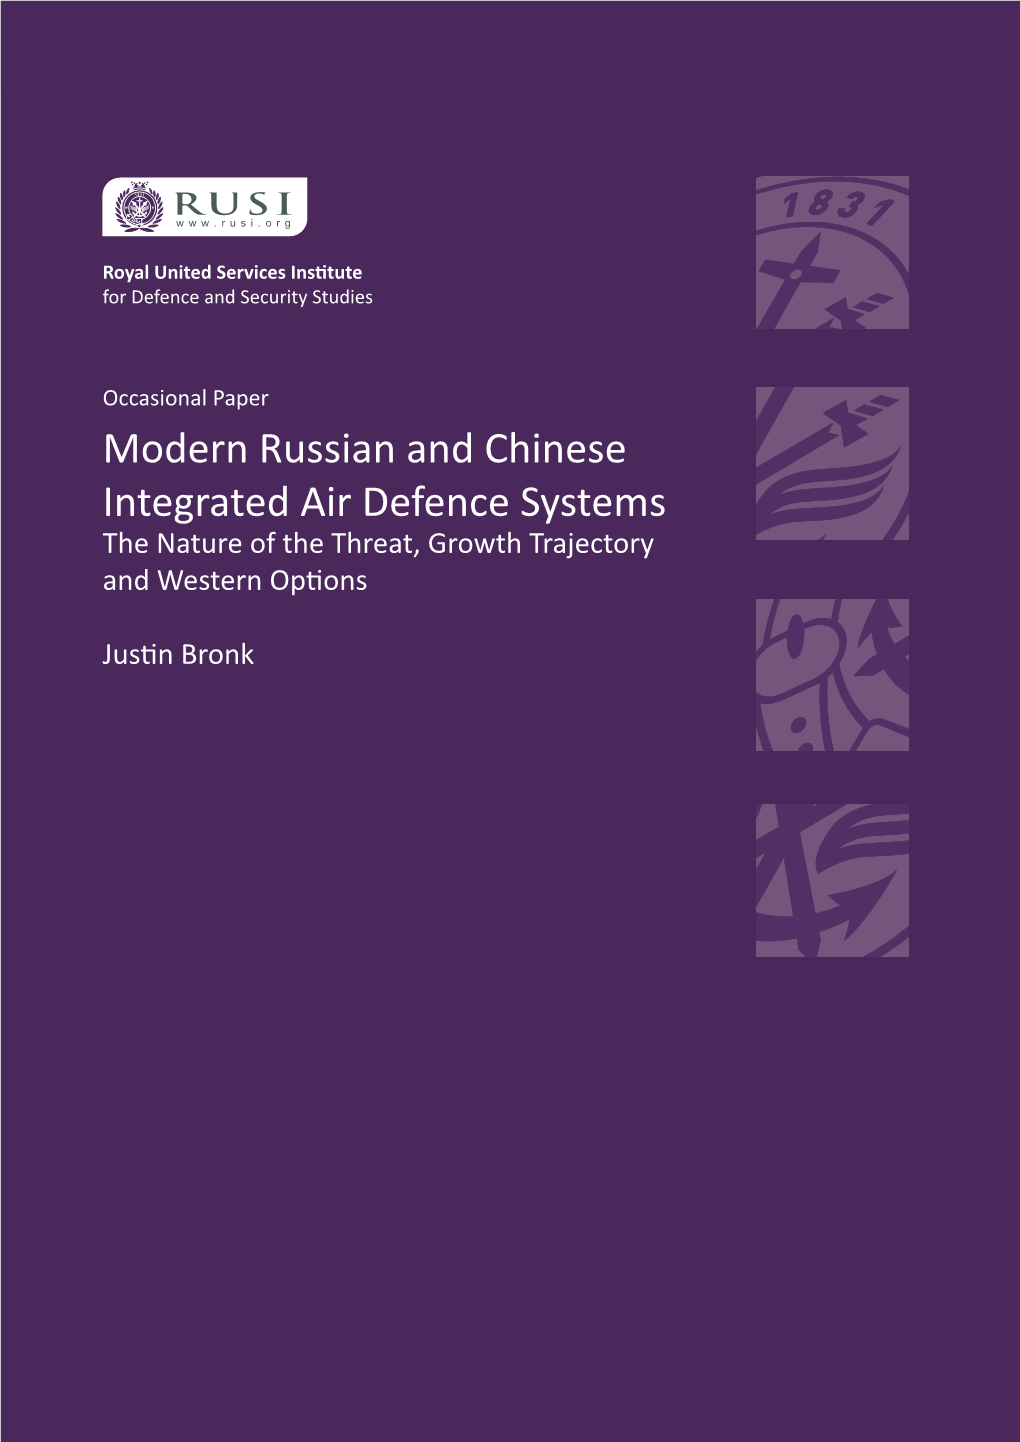 Modern Russian and Chinese Integrated Air Defence Systems the Nature of the Threat, Growth Trajectory and Western Options